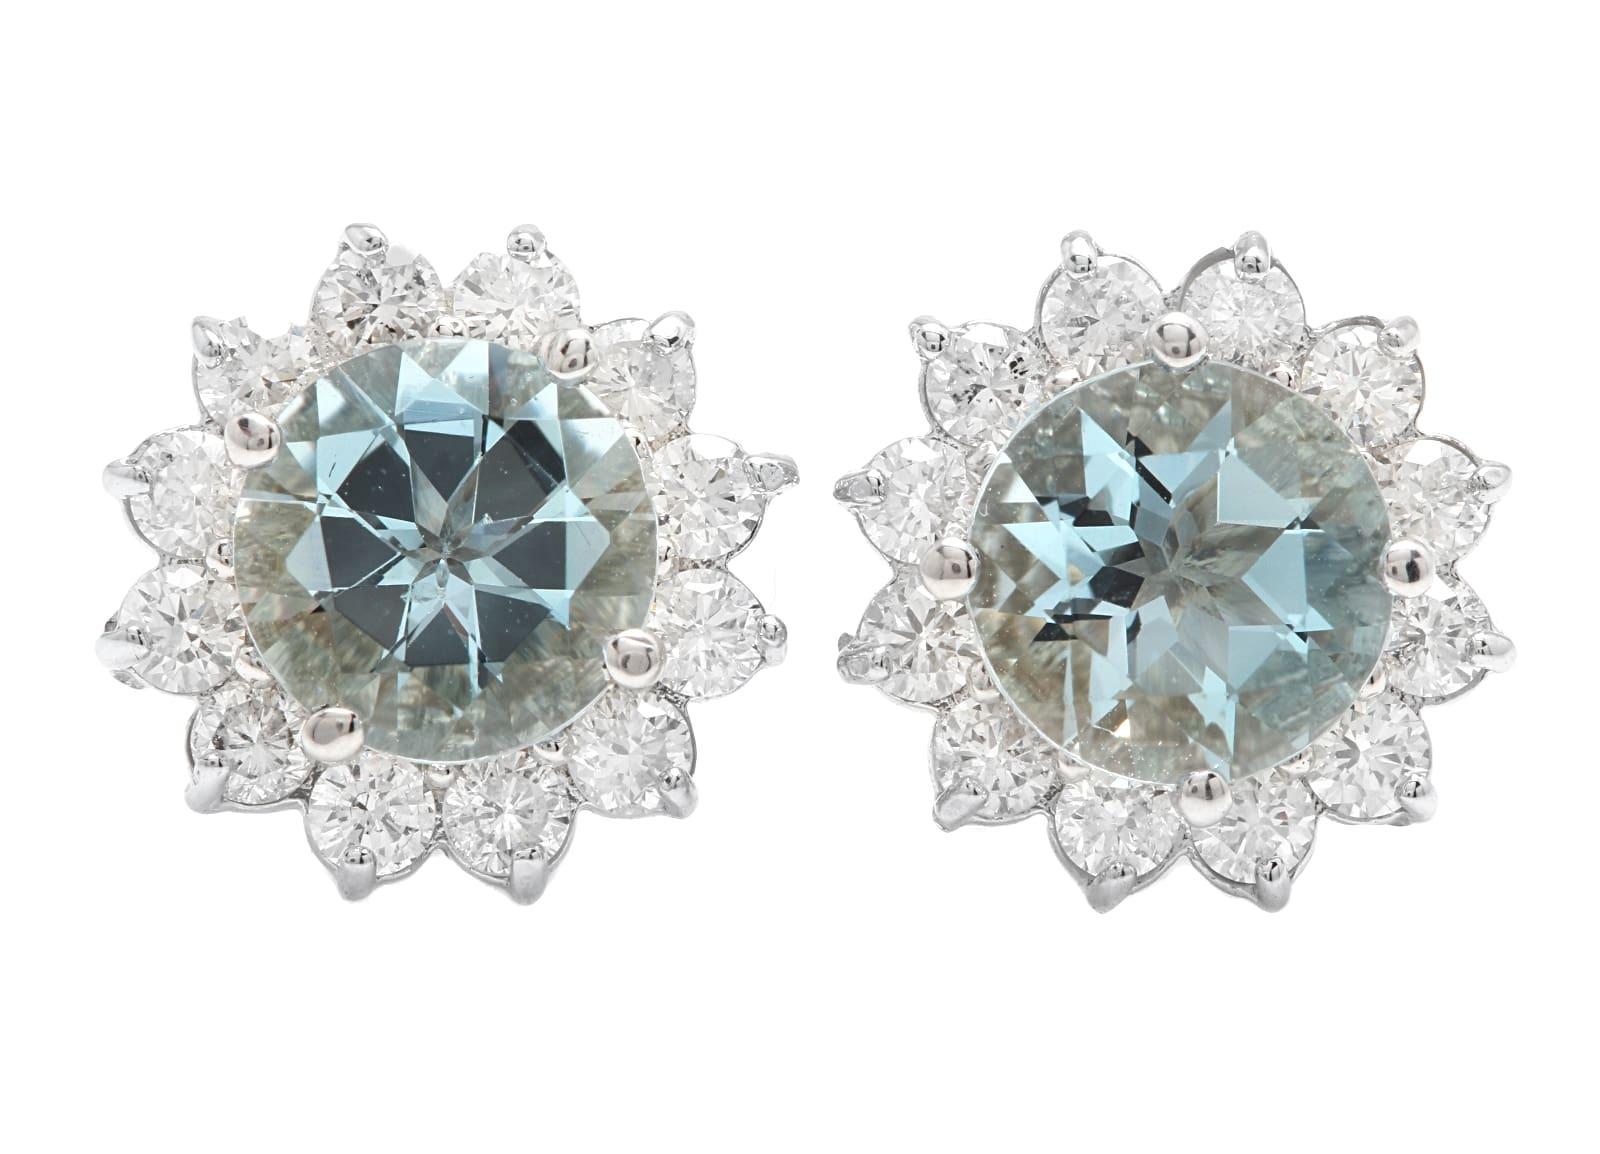 3.50 Carats Natural Aquamarine and Diamond 14K Solid White Gold Stud Earrings

Amazing looking piece! 

Suggested Replacement Value $4,200.00 

Total Natural Round Cut White Diamonds Weight: Approx. 1.00 Carat (color G-H / Clarity SI1-SI2)

Total